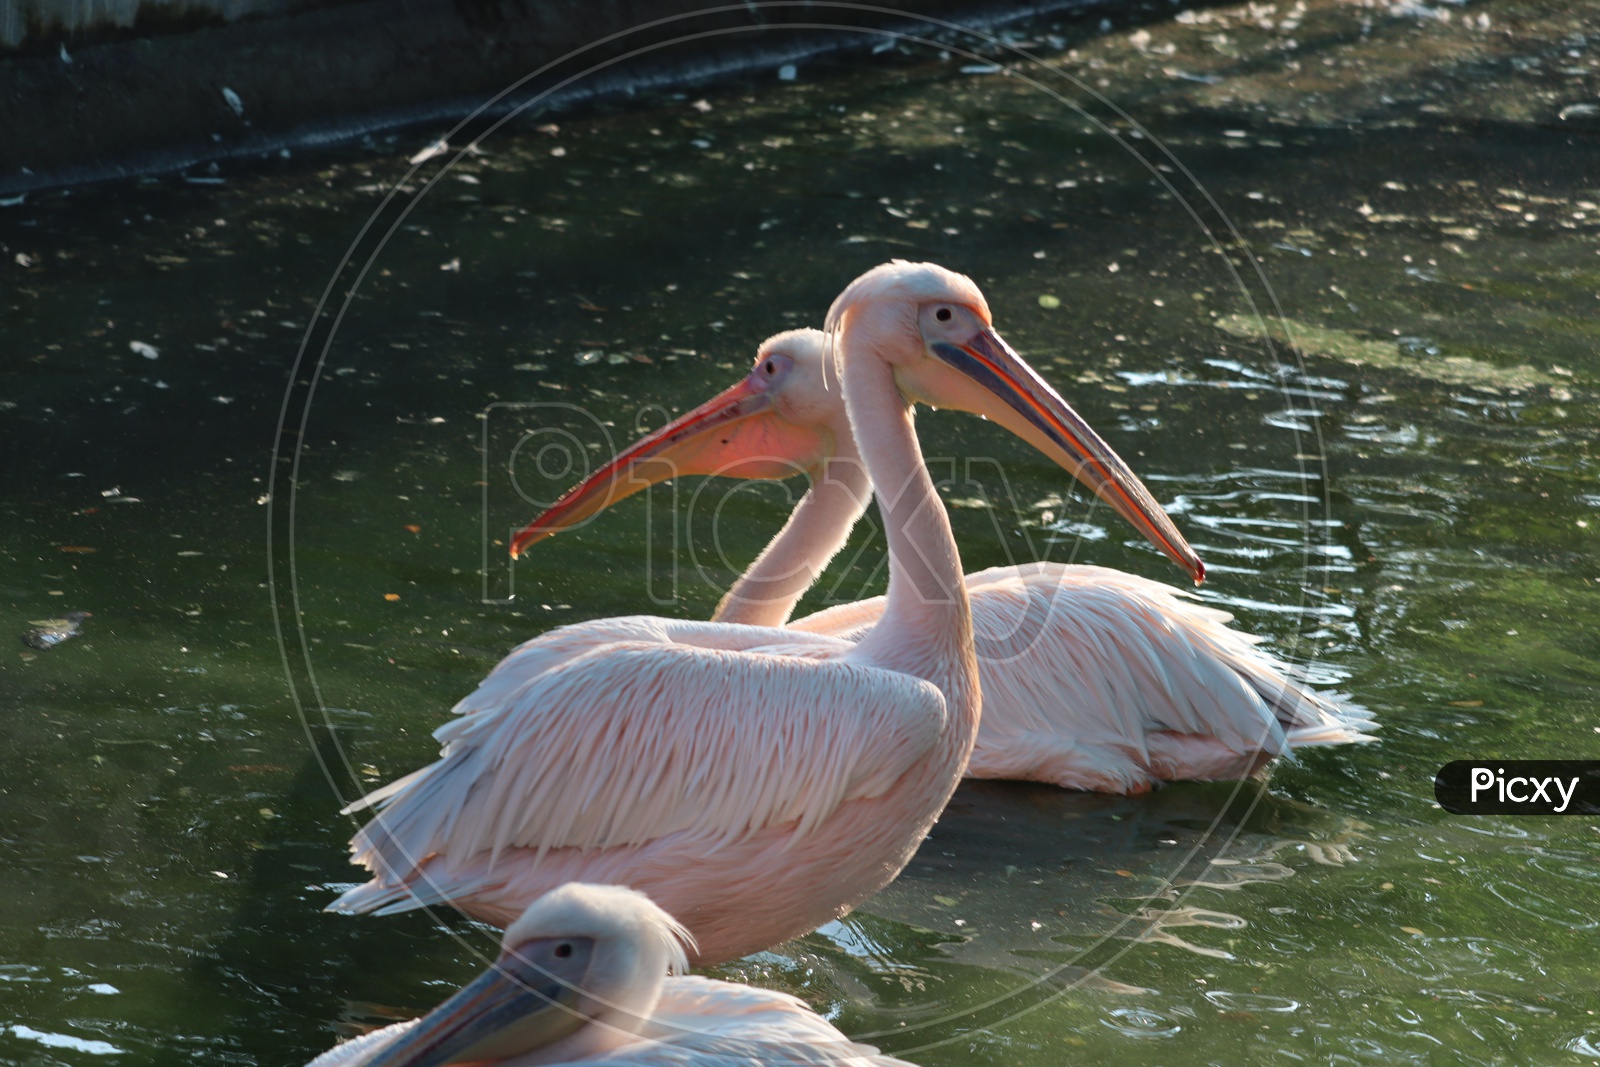 The great white pelican (Pelecanus Onocrotalus) also known as the eastern white pelican, rosy pelican or white pelican, is a large water bird in the family Pelecanidae. Two pelicans on water